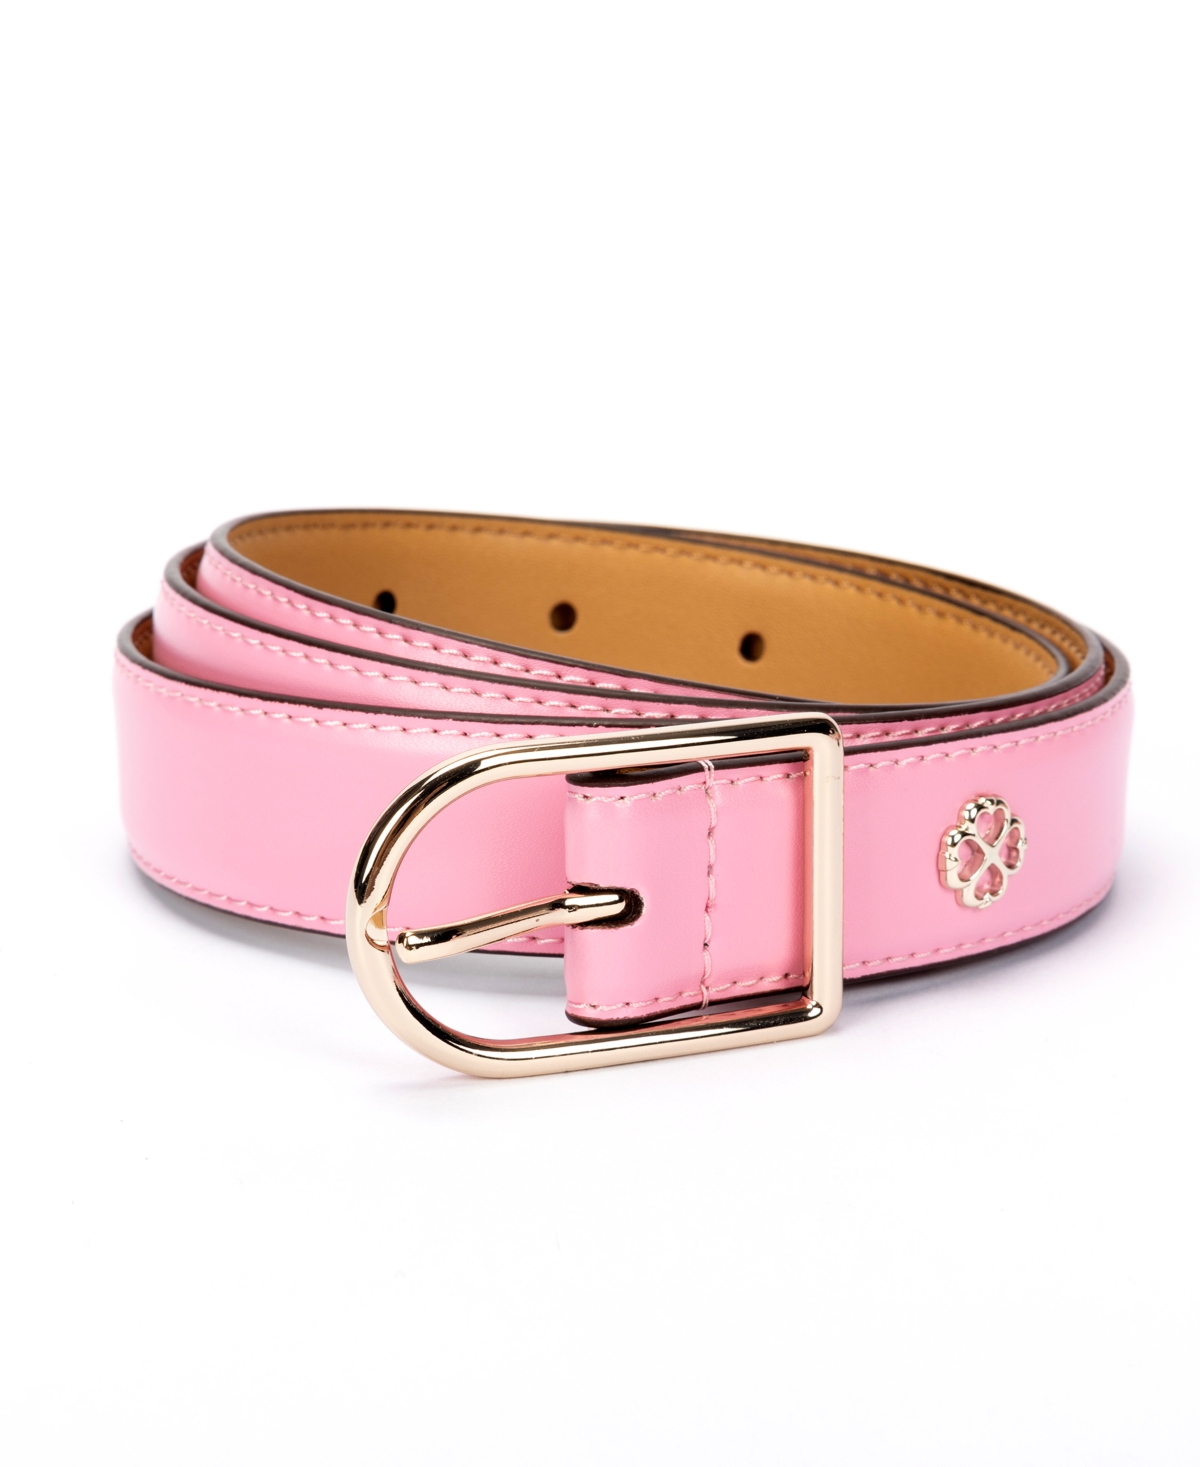 Women's 25Mm Belt with Asymmetrical Buckle - Rhododendron Grove